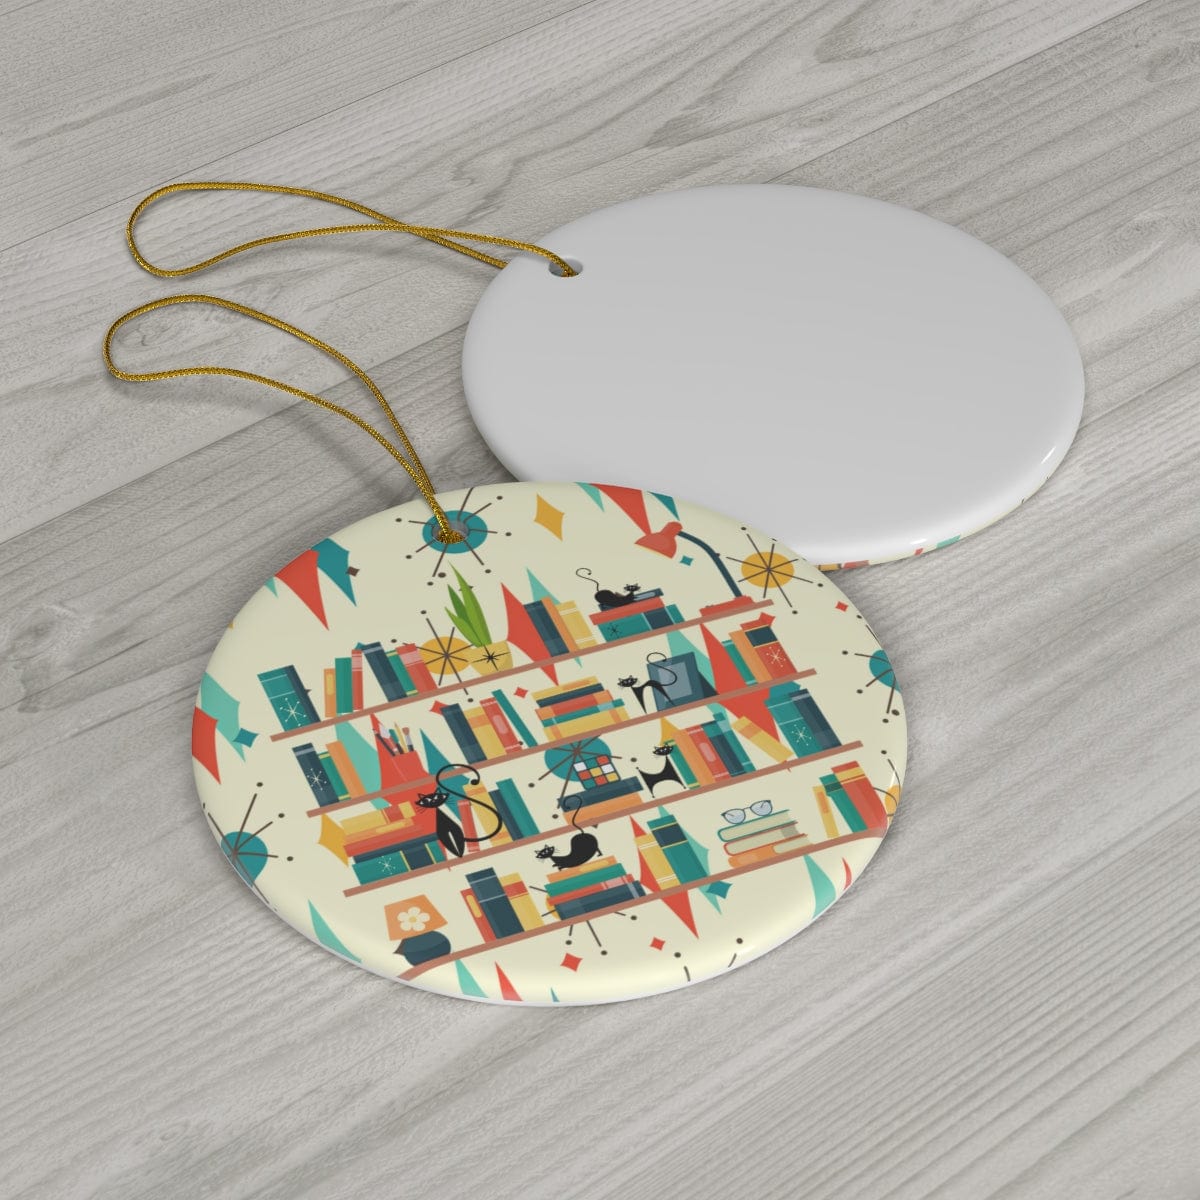 Book Lovers Gifts, Christmas Ceramic Ornament, Atomic Cats, Mid Century Modern Franciscan Pattern X-Mas Retro Ornaments Home Decor